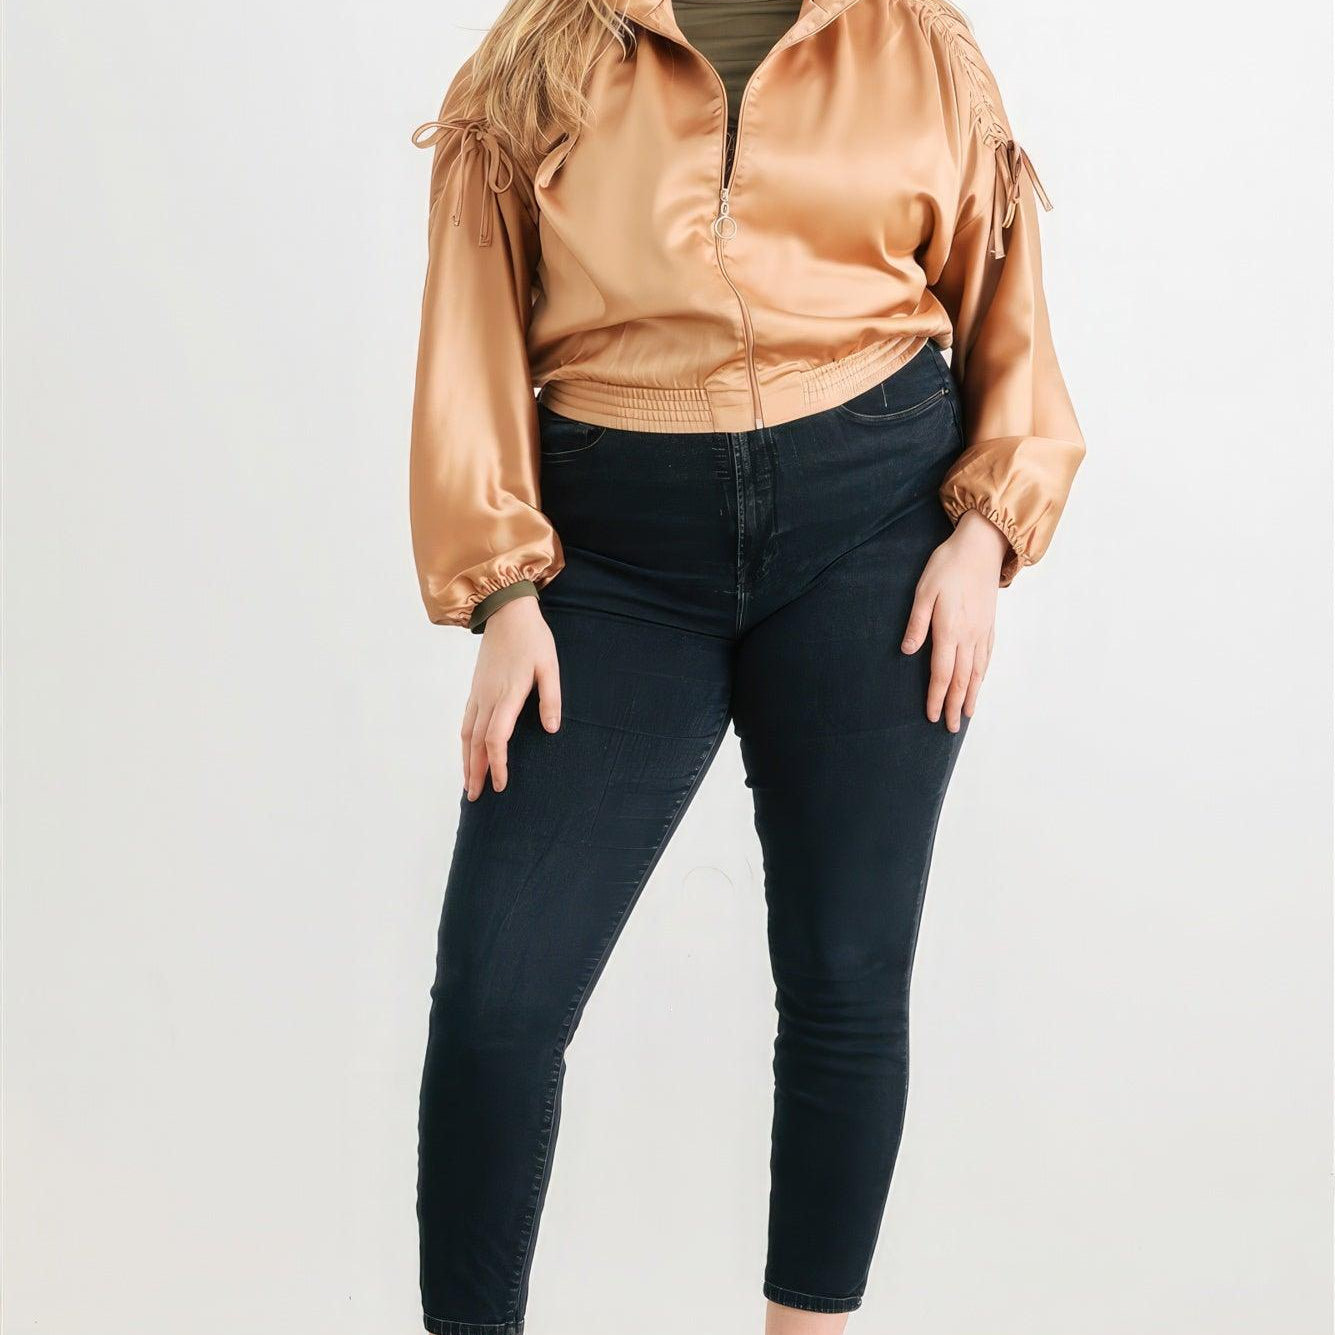  Plus Satin Zip-up Ruched Long Sleeve Cropped Bomber Jacket